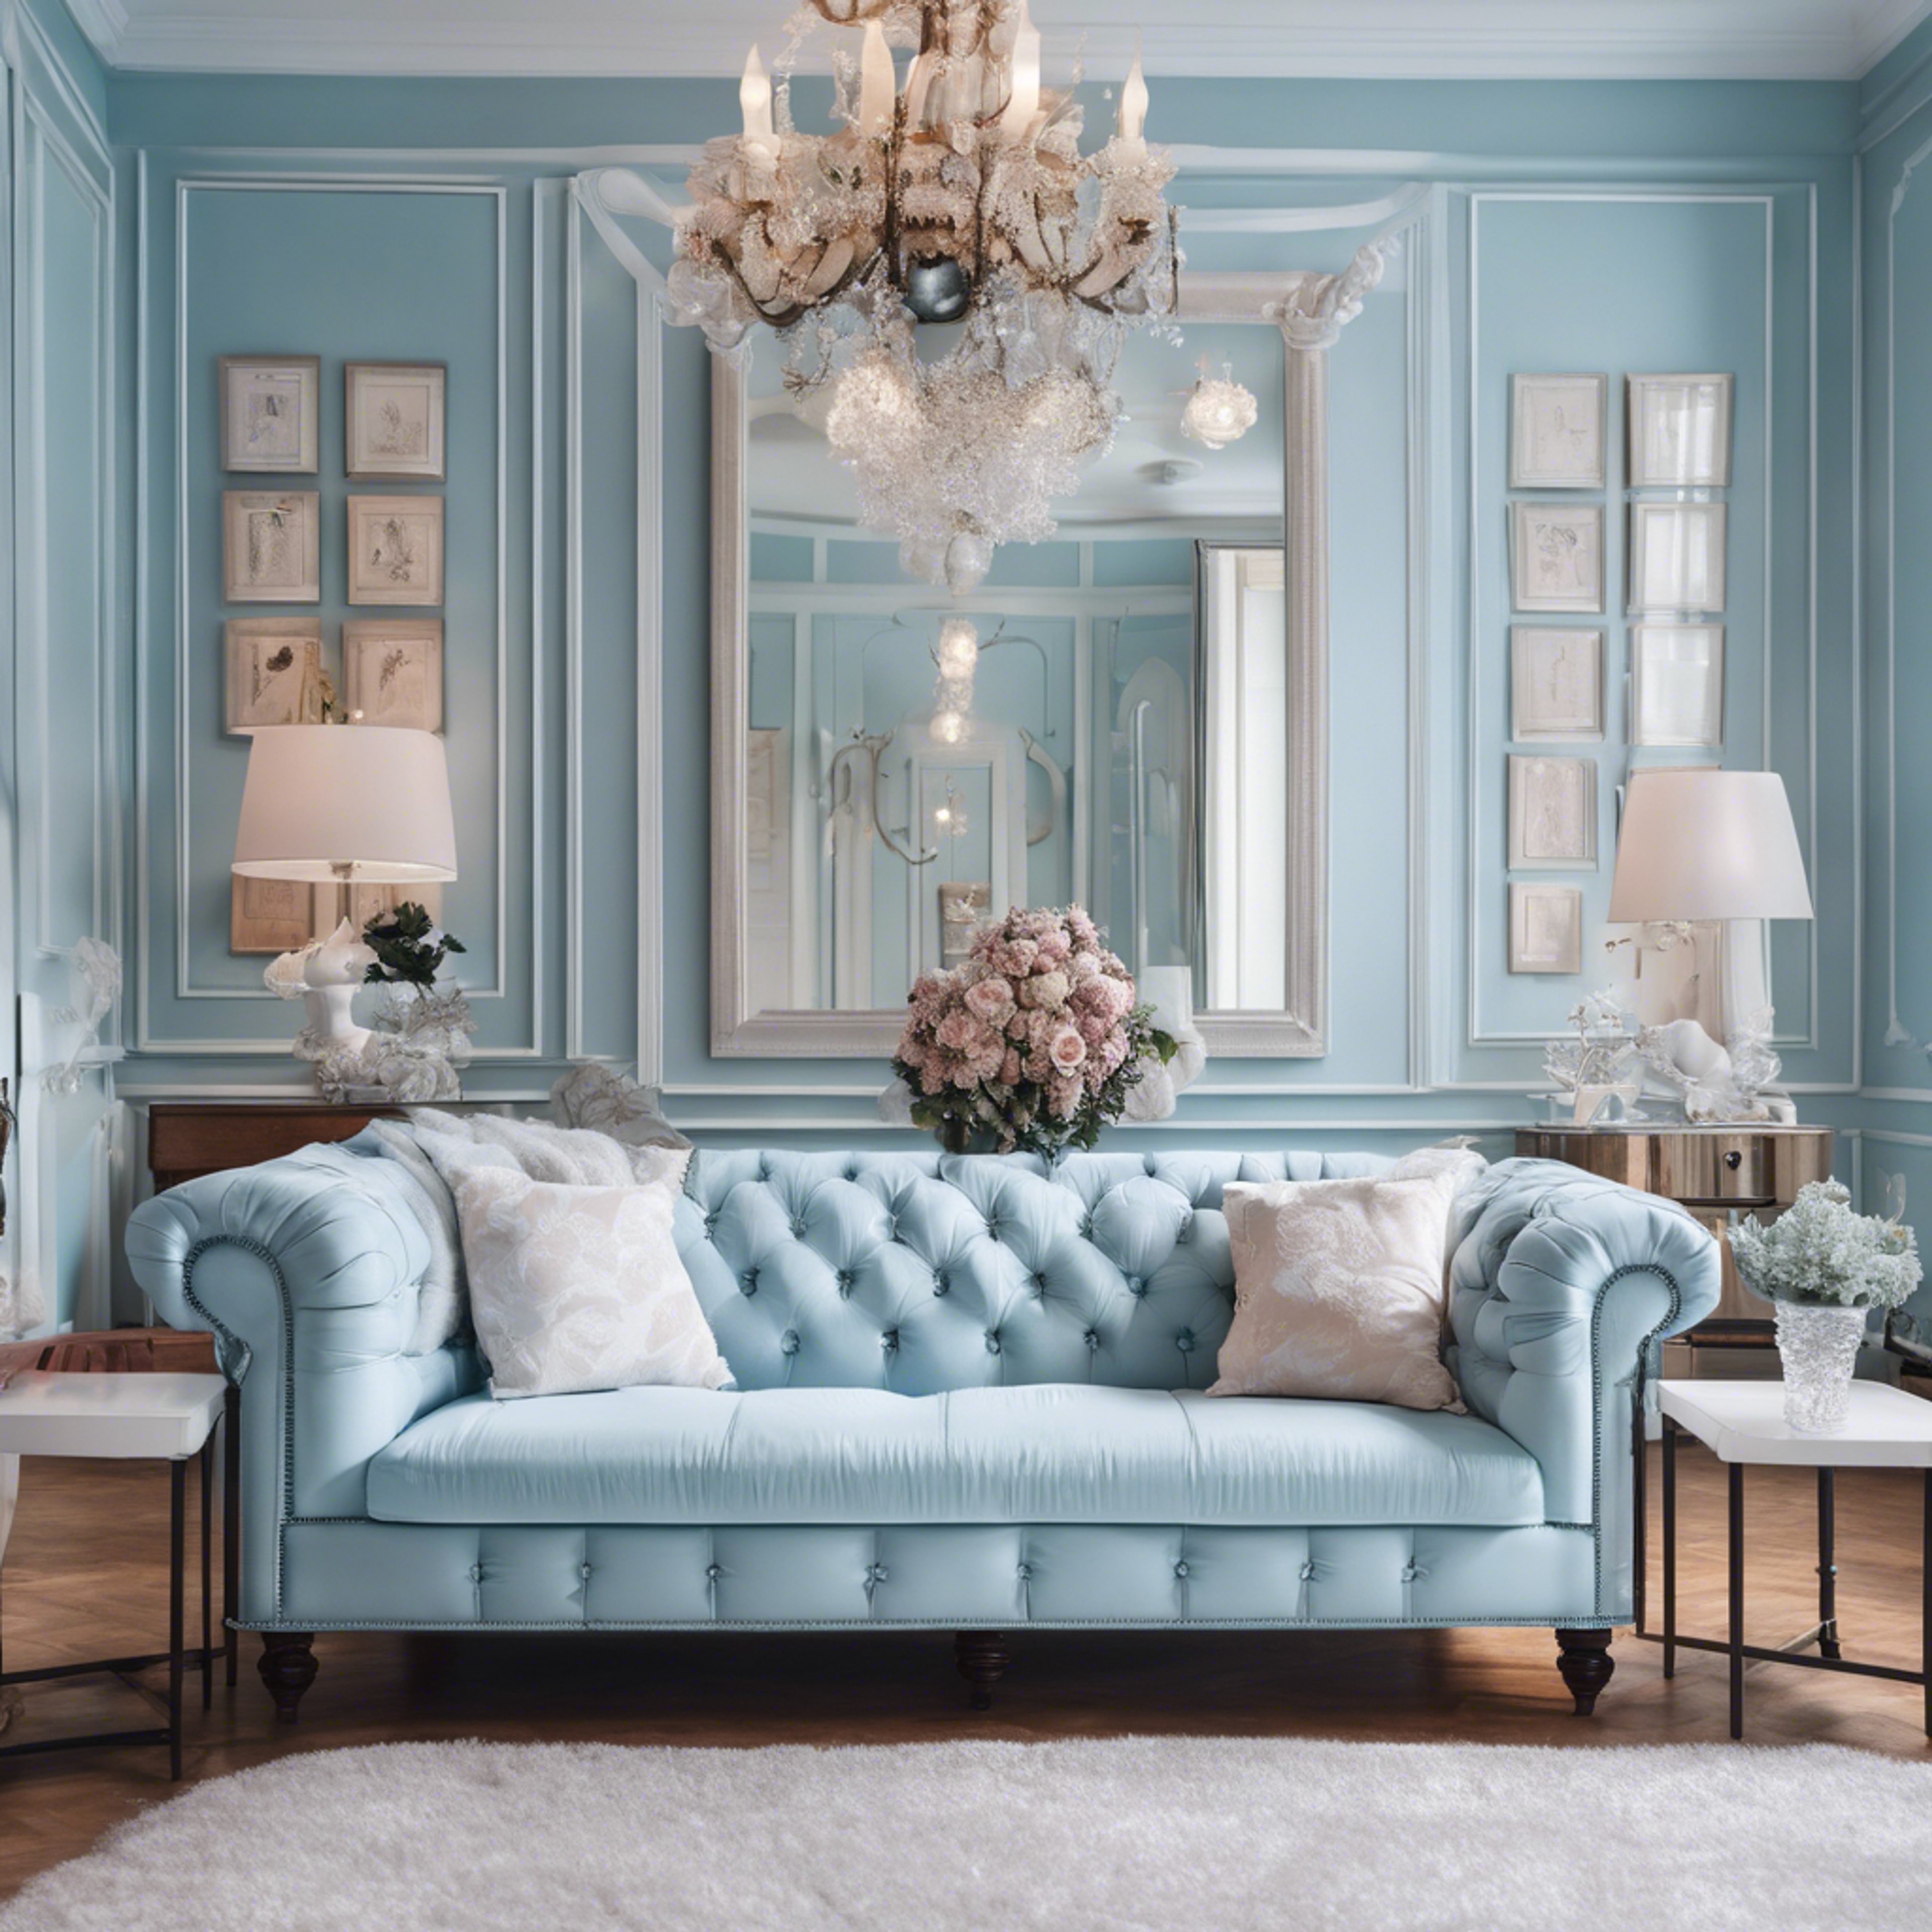 A preppy styled room with pastel blue wallpaper, Chesterfield sofa, and white French style furniture.” 벽지[3904fac215ba4f1eaa62]